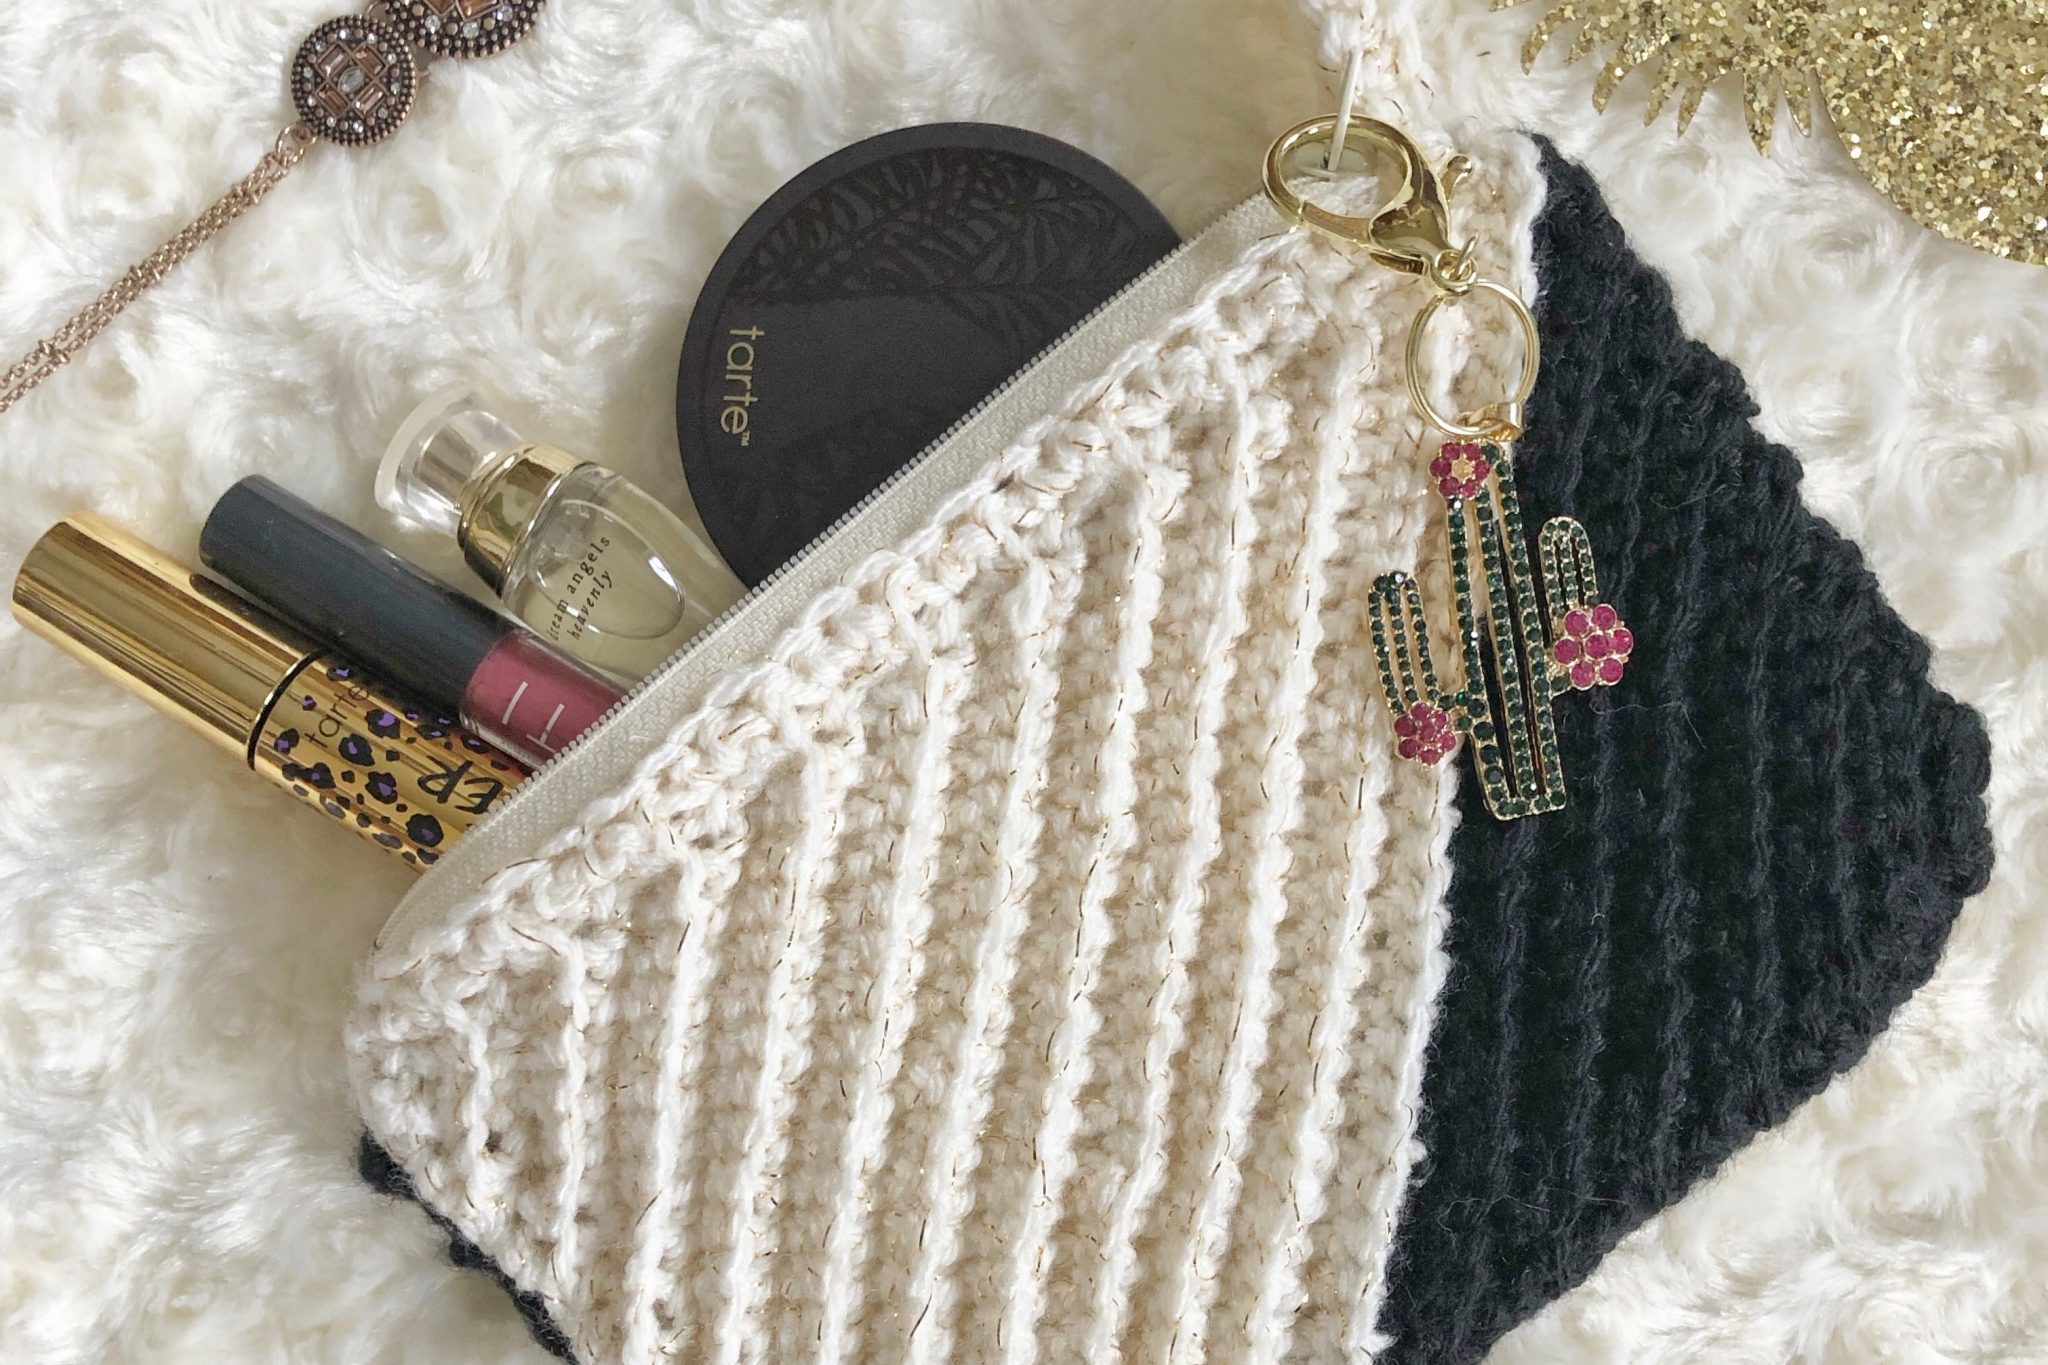 Black and white crochet clutch made with the Kelsi Clutch pattern with a cactus keyring and filled with makeup